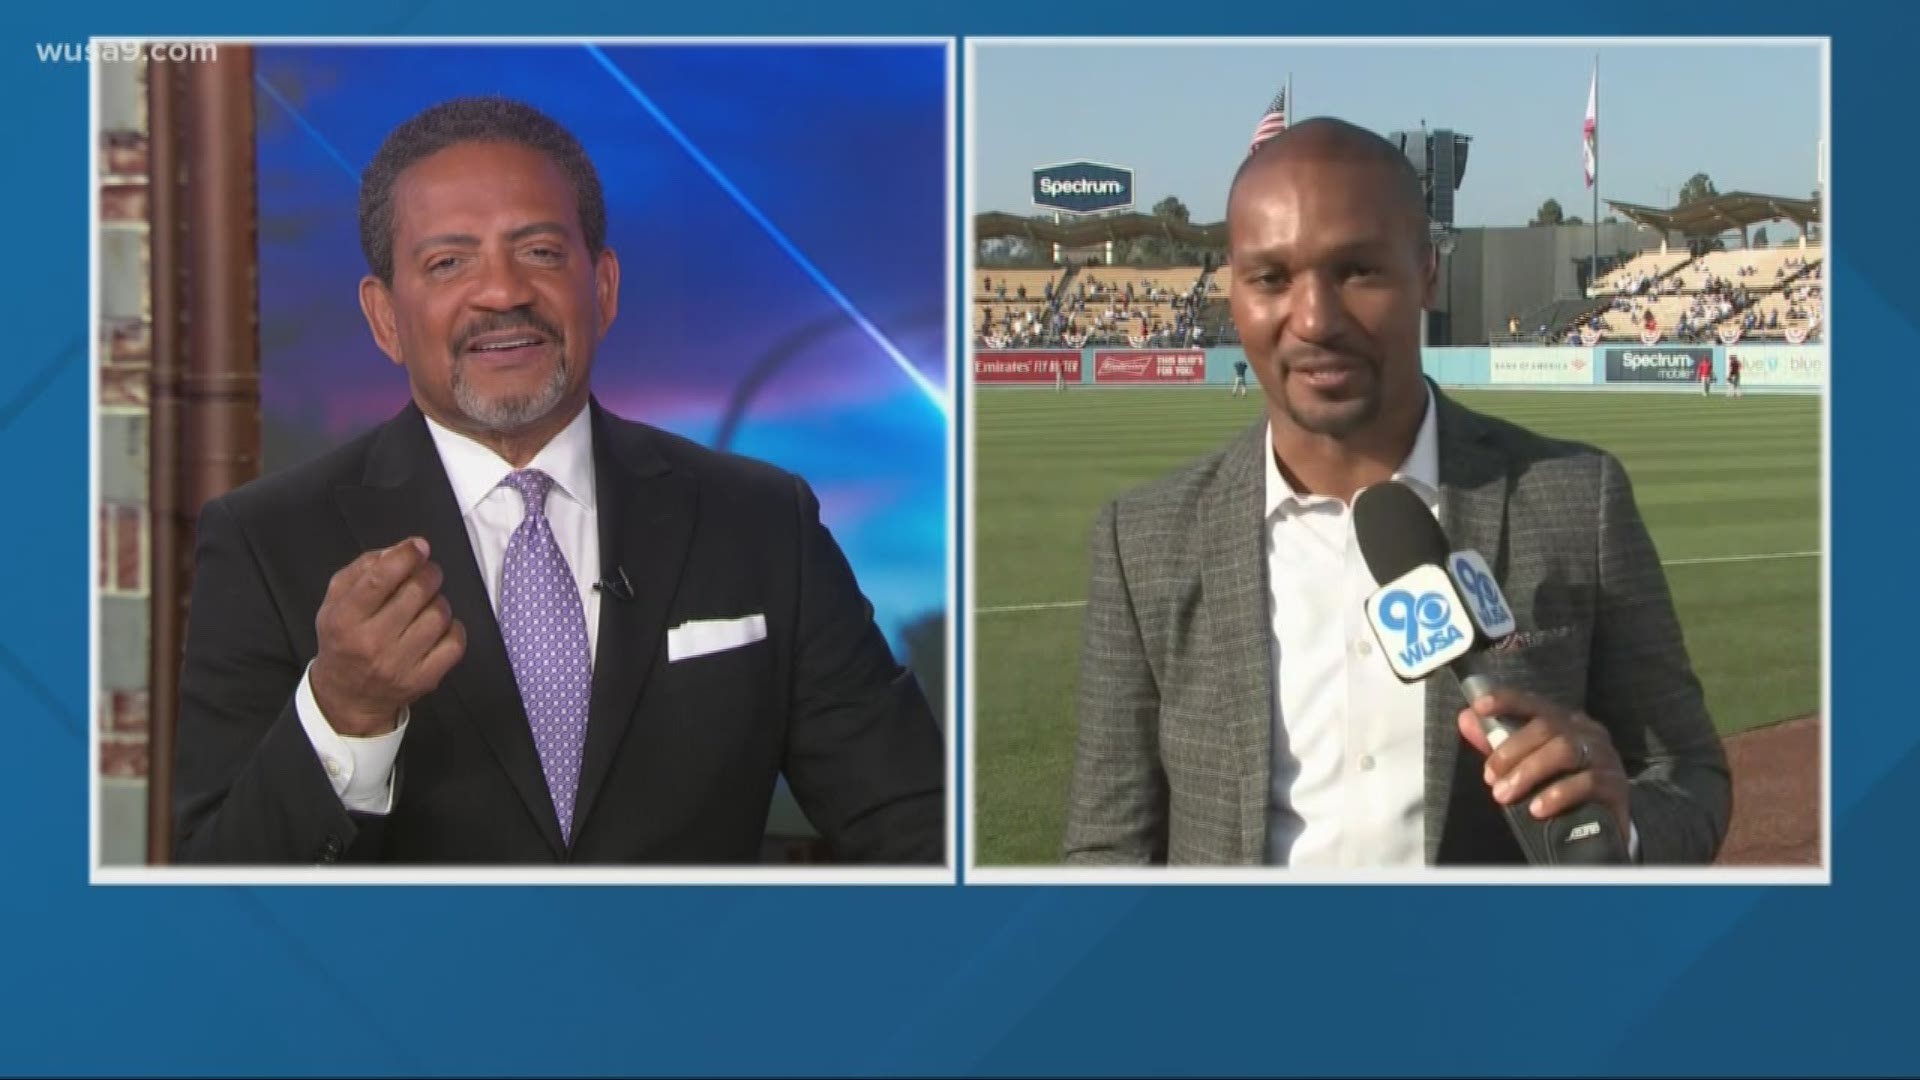 WUSA9 Sports Director Darren Haynes is live from Los Angeles to report on the Nationals as they go into their elimination game with the Dodgers.